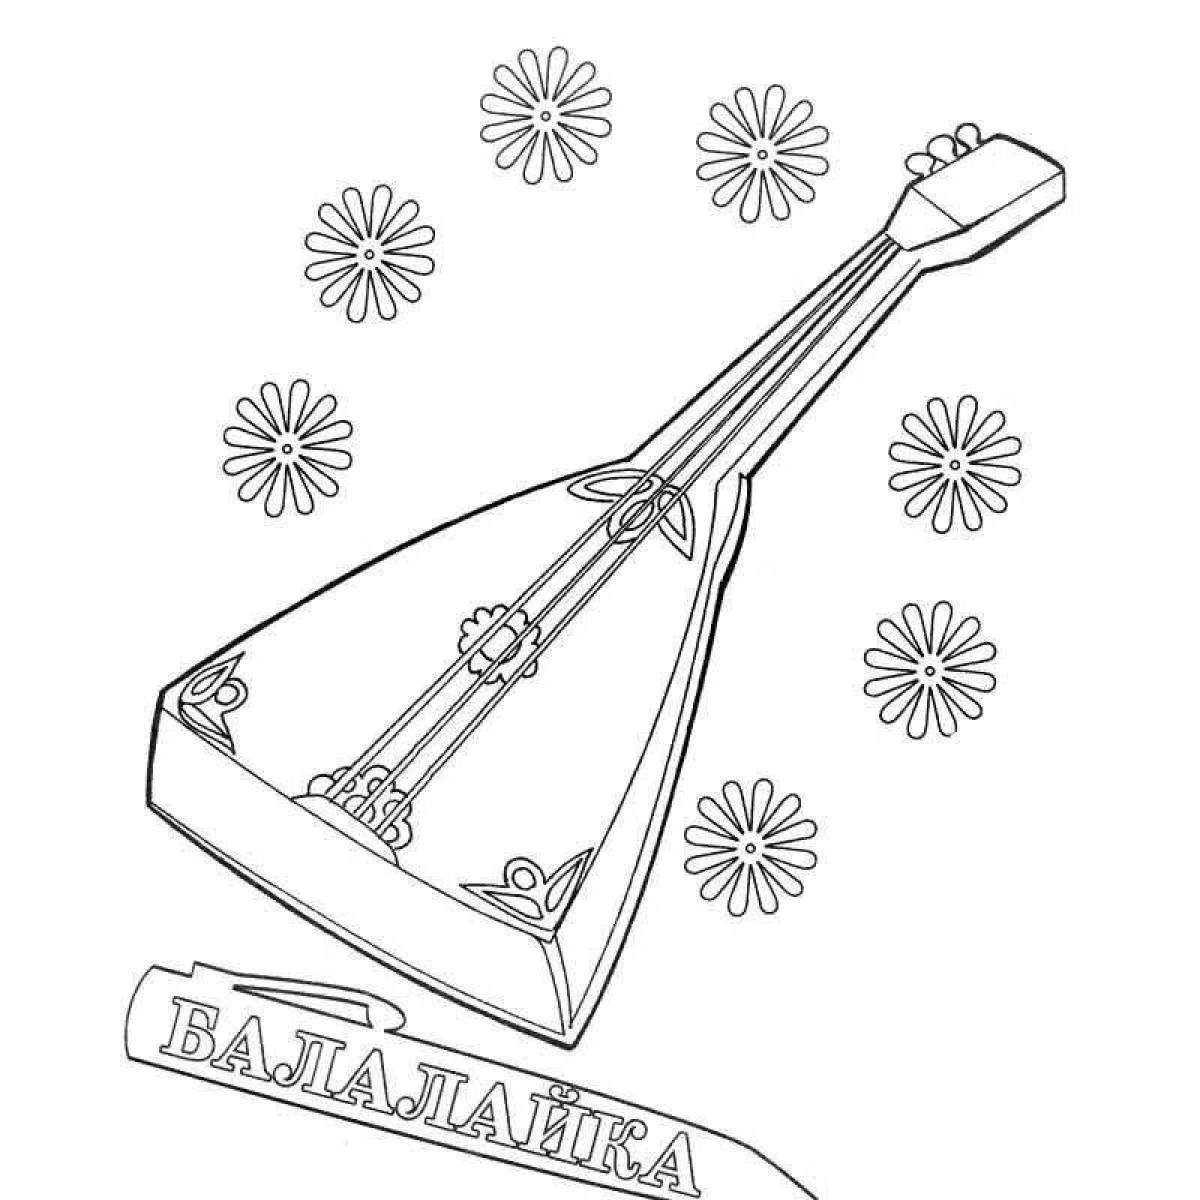 Coloring page funny Russian folk musical instruments